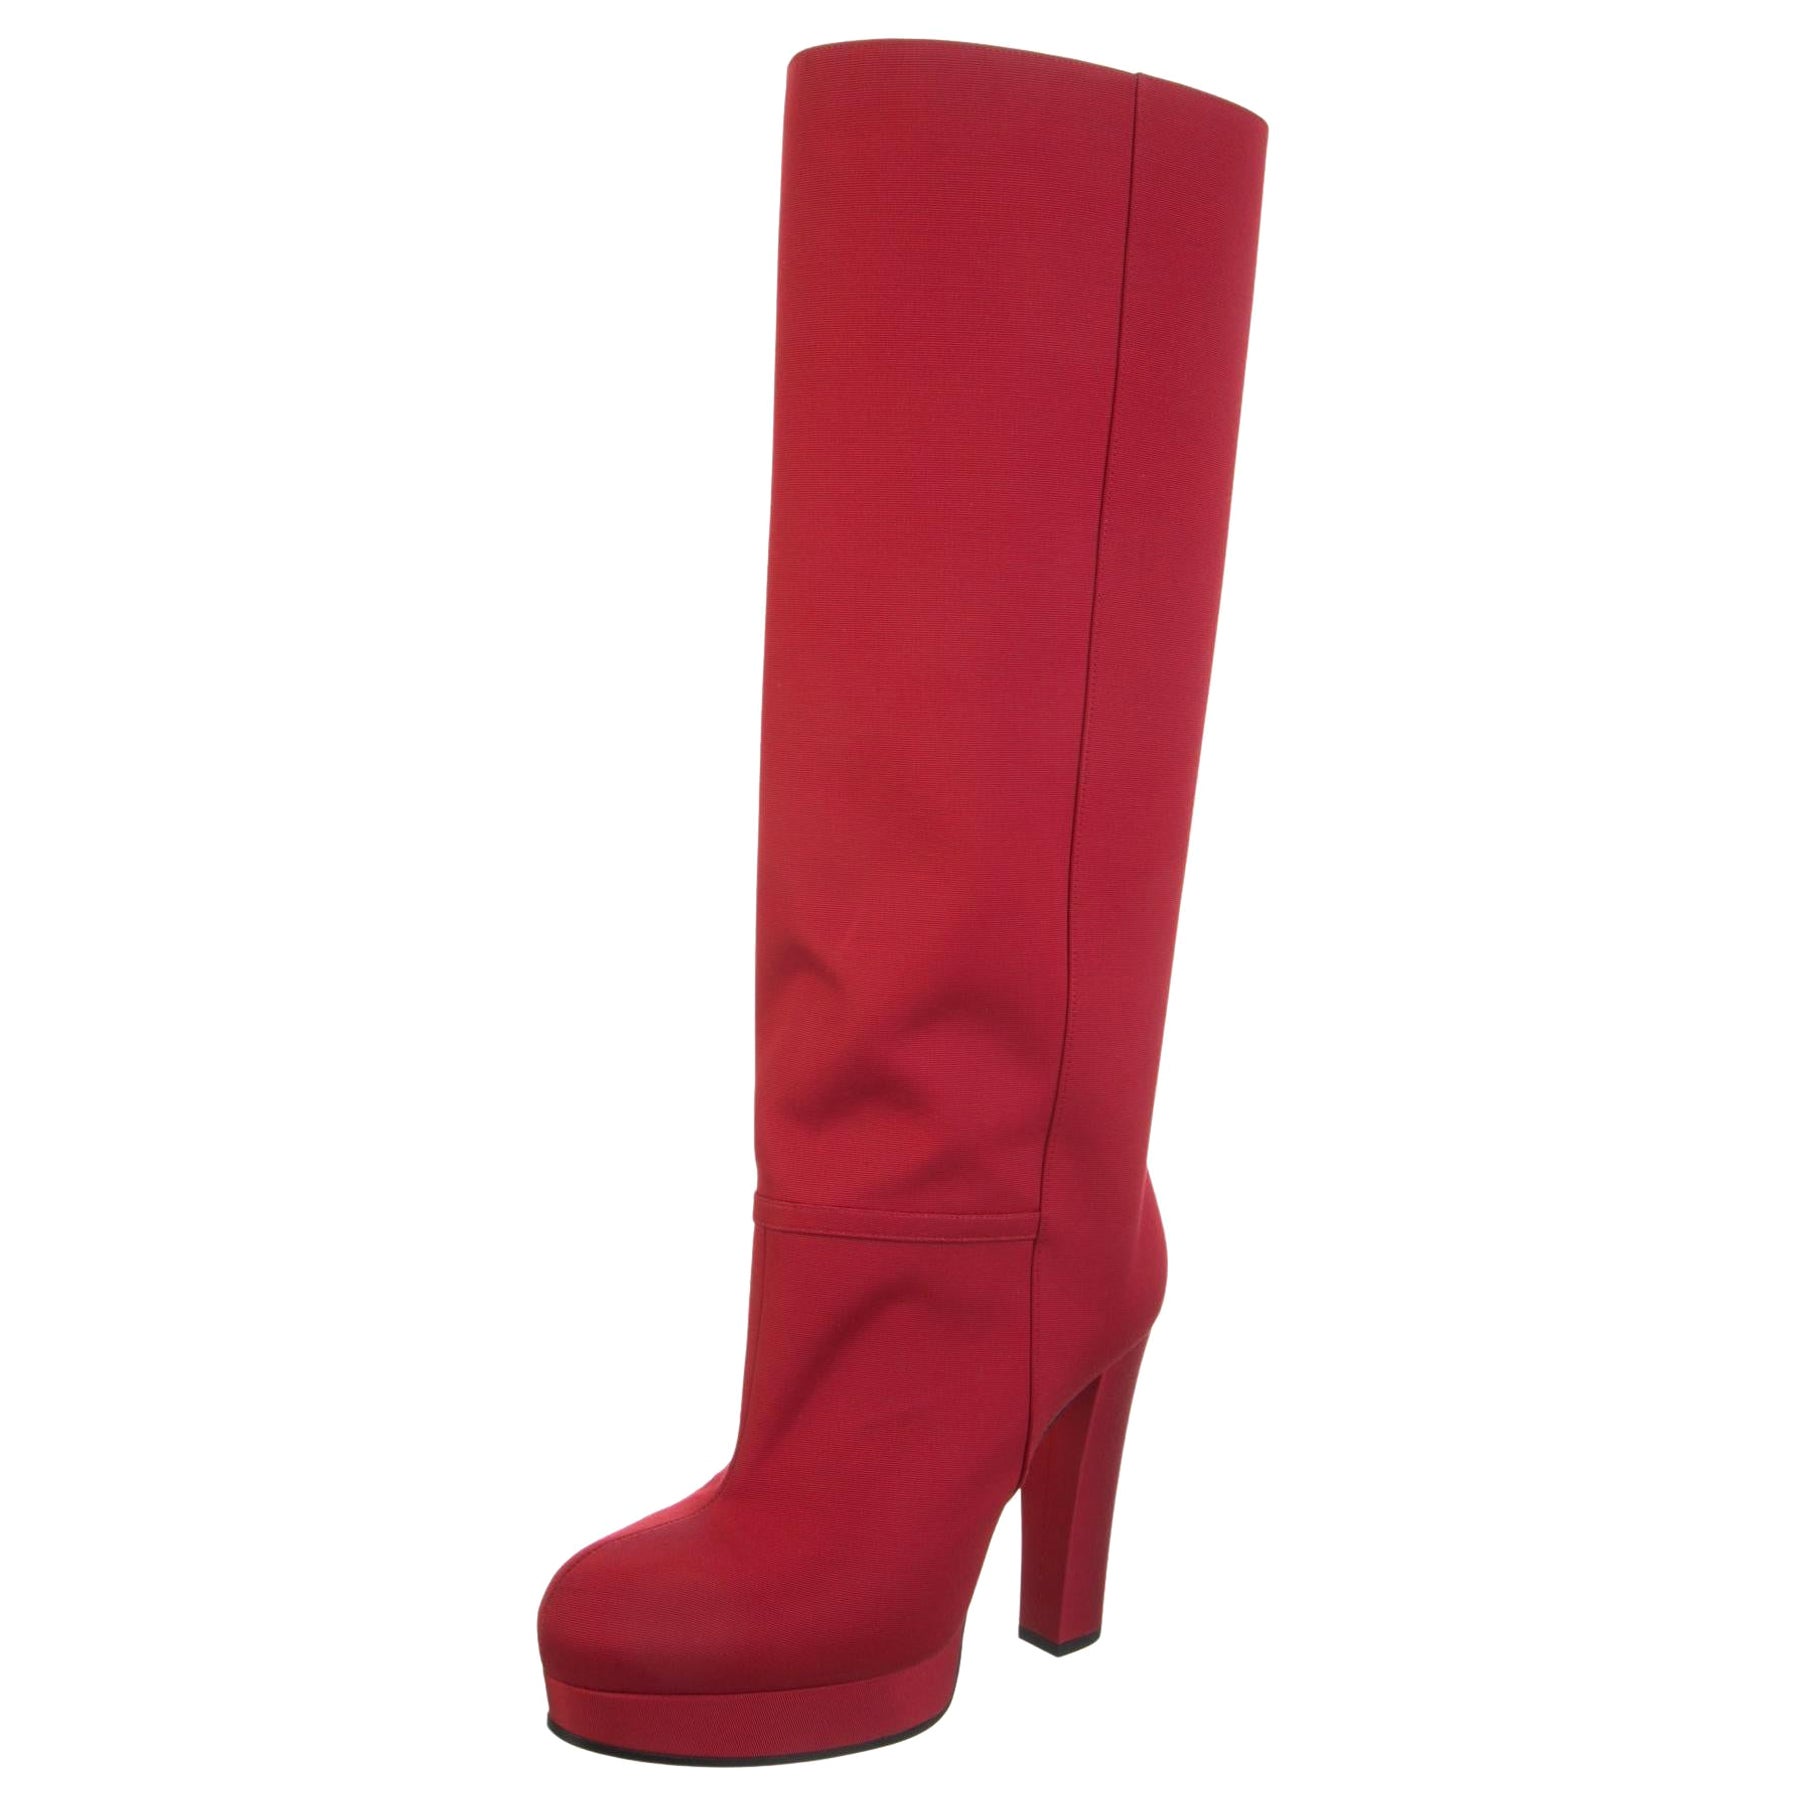 New With Box Gucci Fall 2019 Alessandro Michele Red Boots Sz 36.5 For Sale